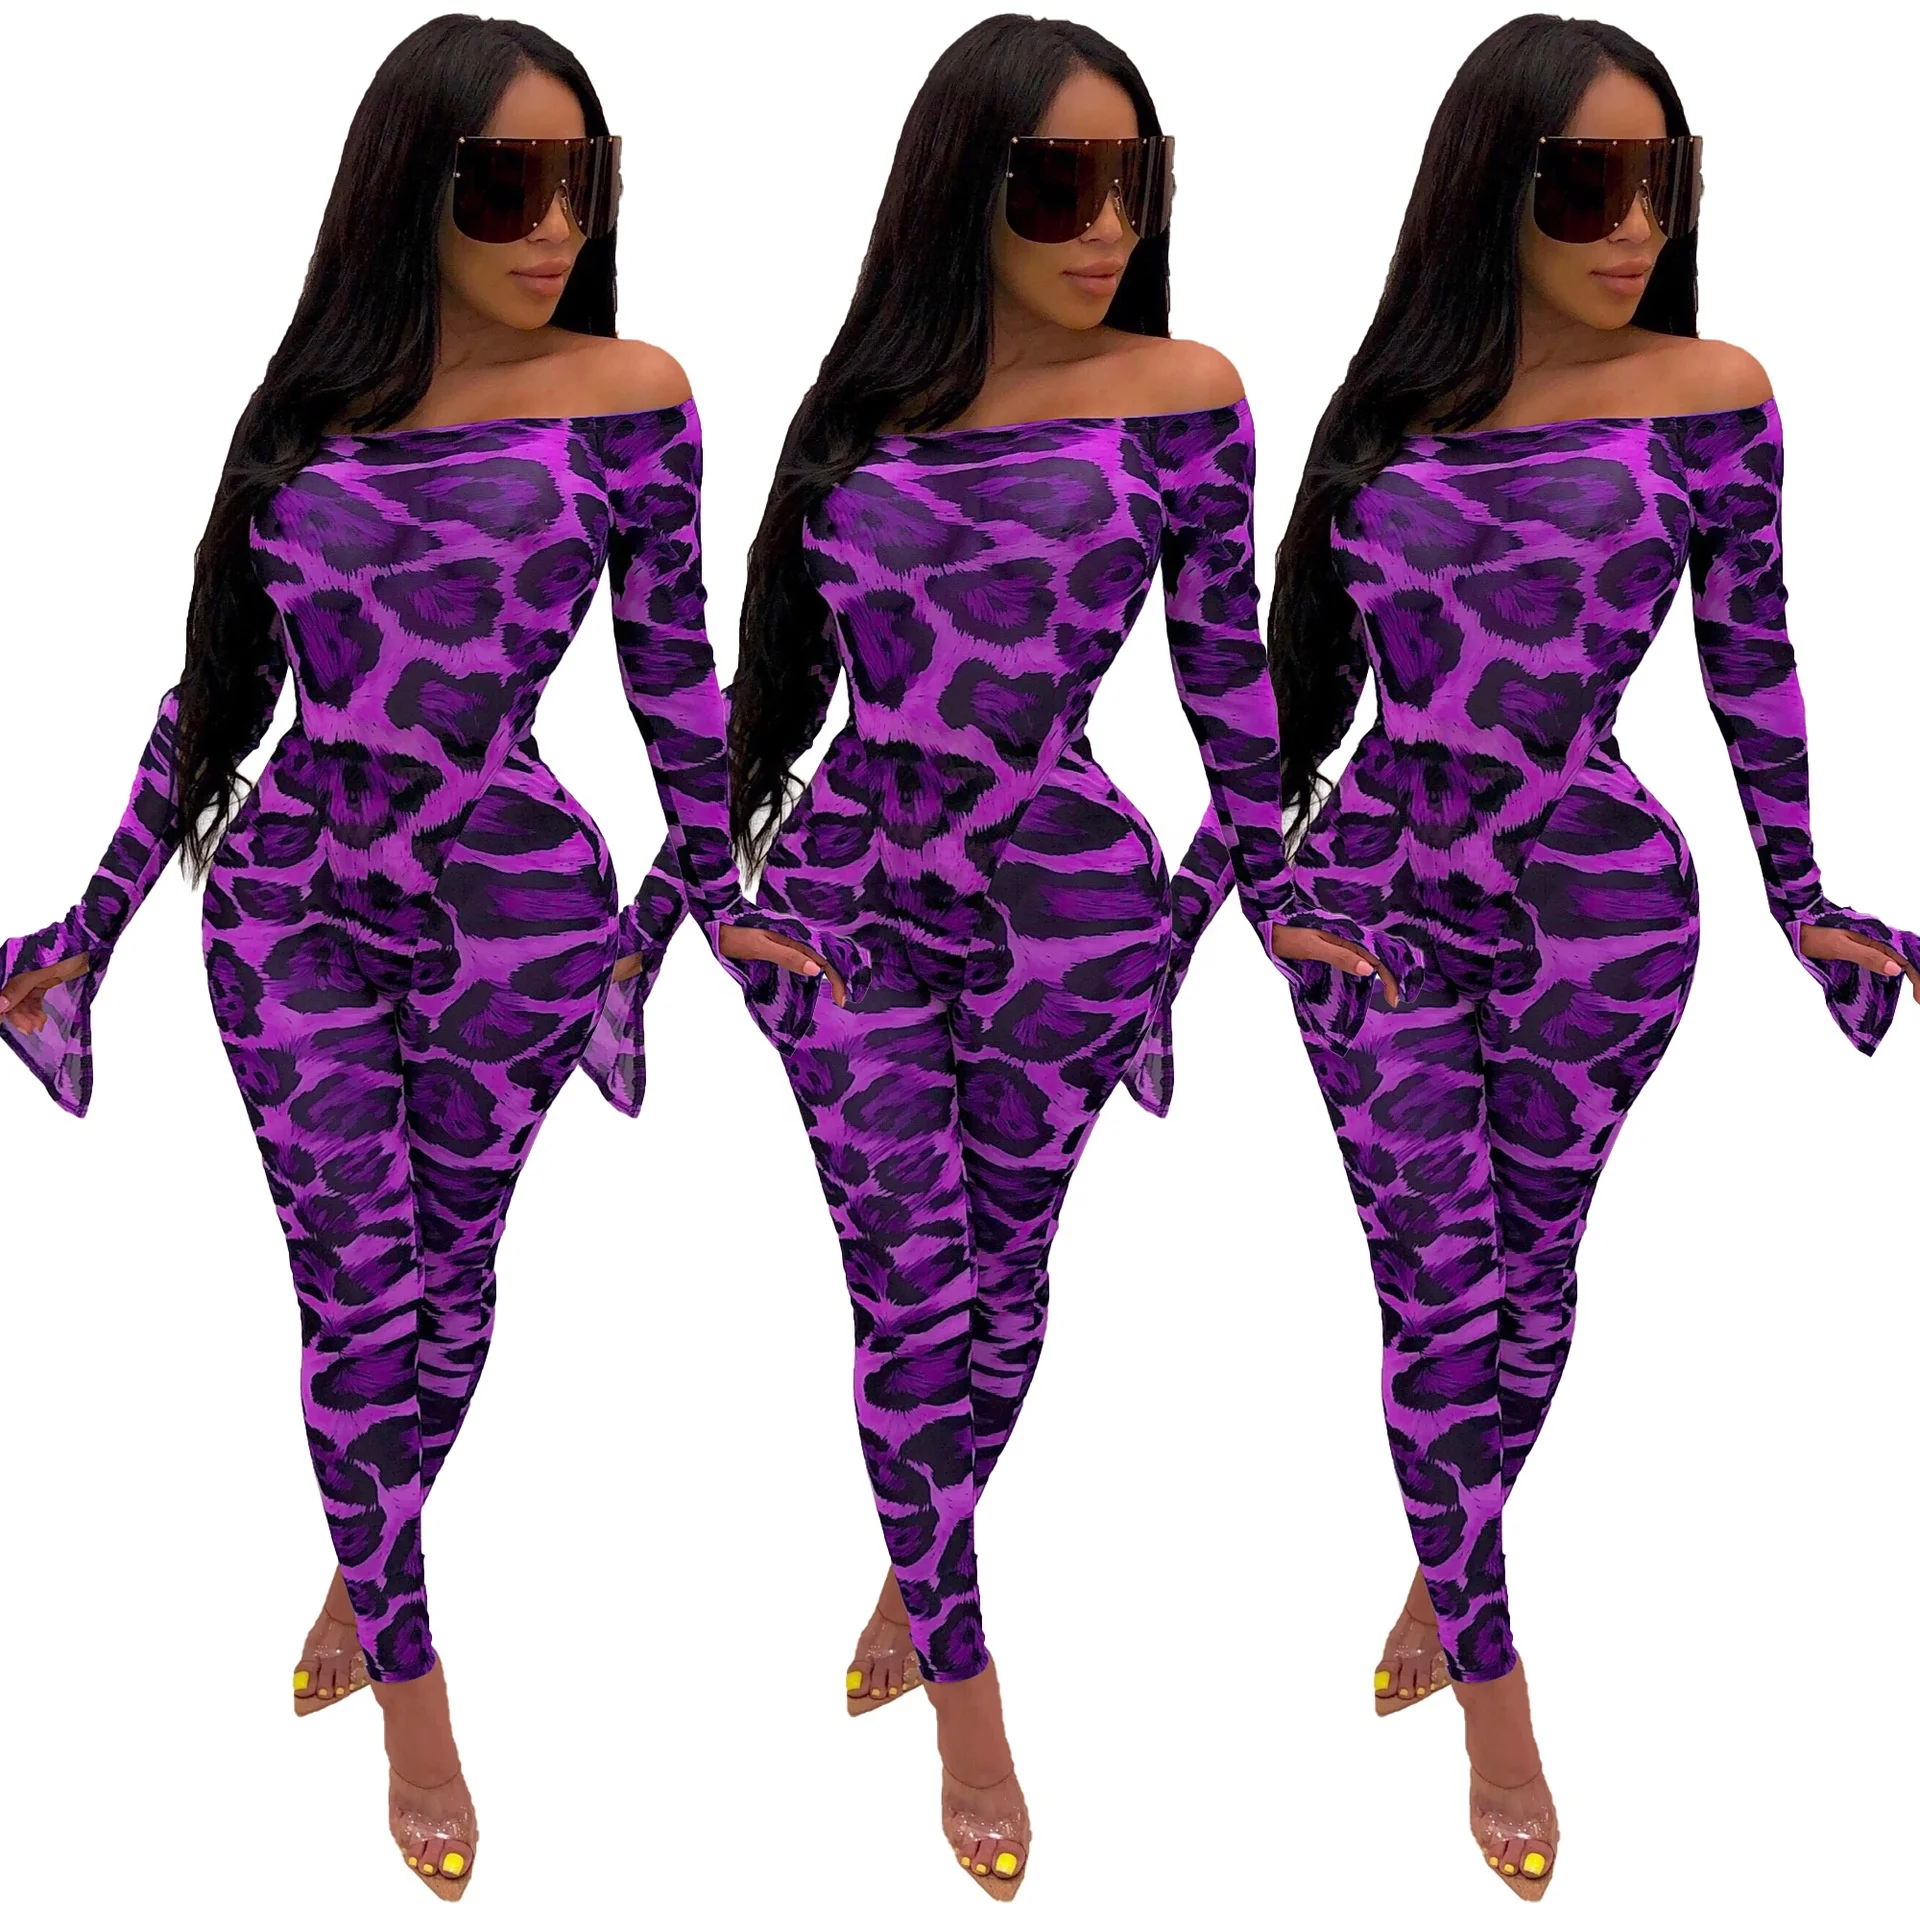 

Women's Casual Slash Neck Off Shoulder Full Bell sleeve Two Piece Sets Sheath Outfit 2019 Printed Leopard 2 Piece sexy pants set, Women's sexy pants set